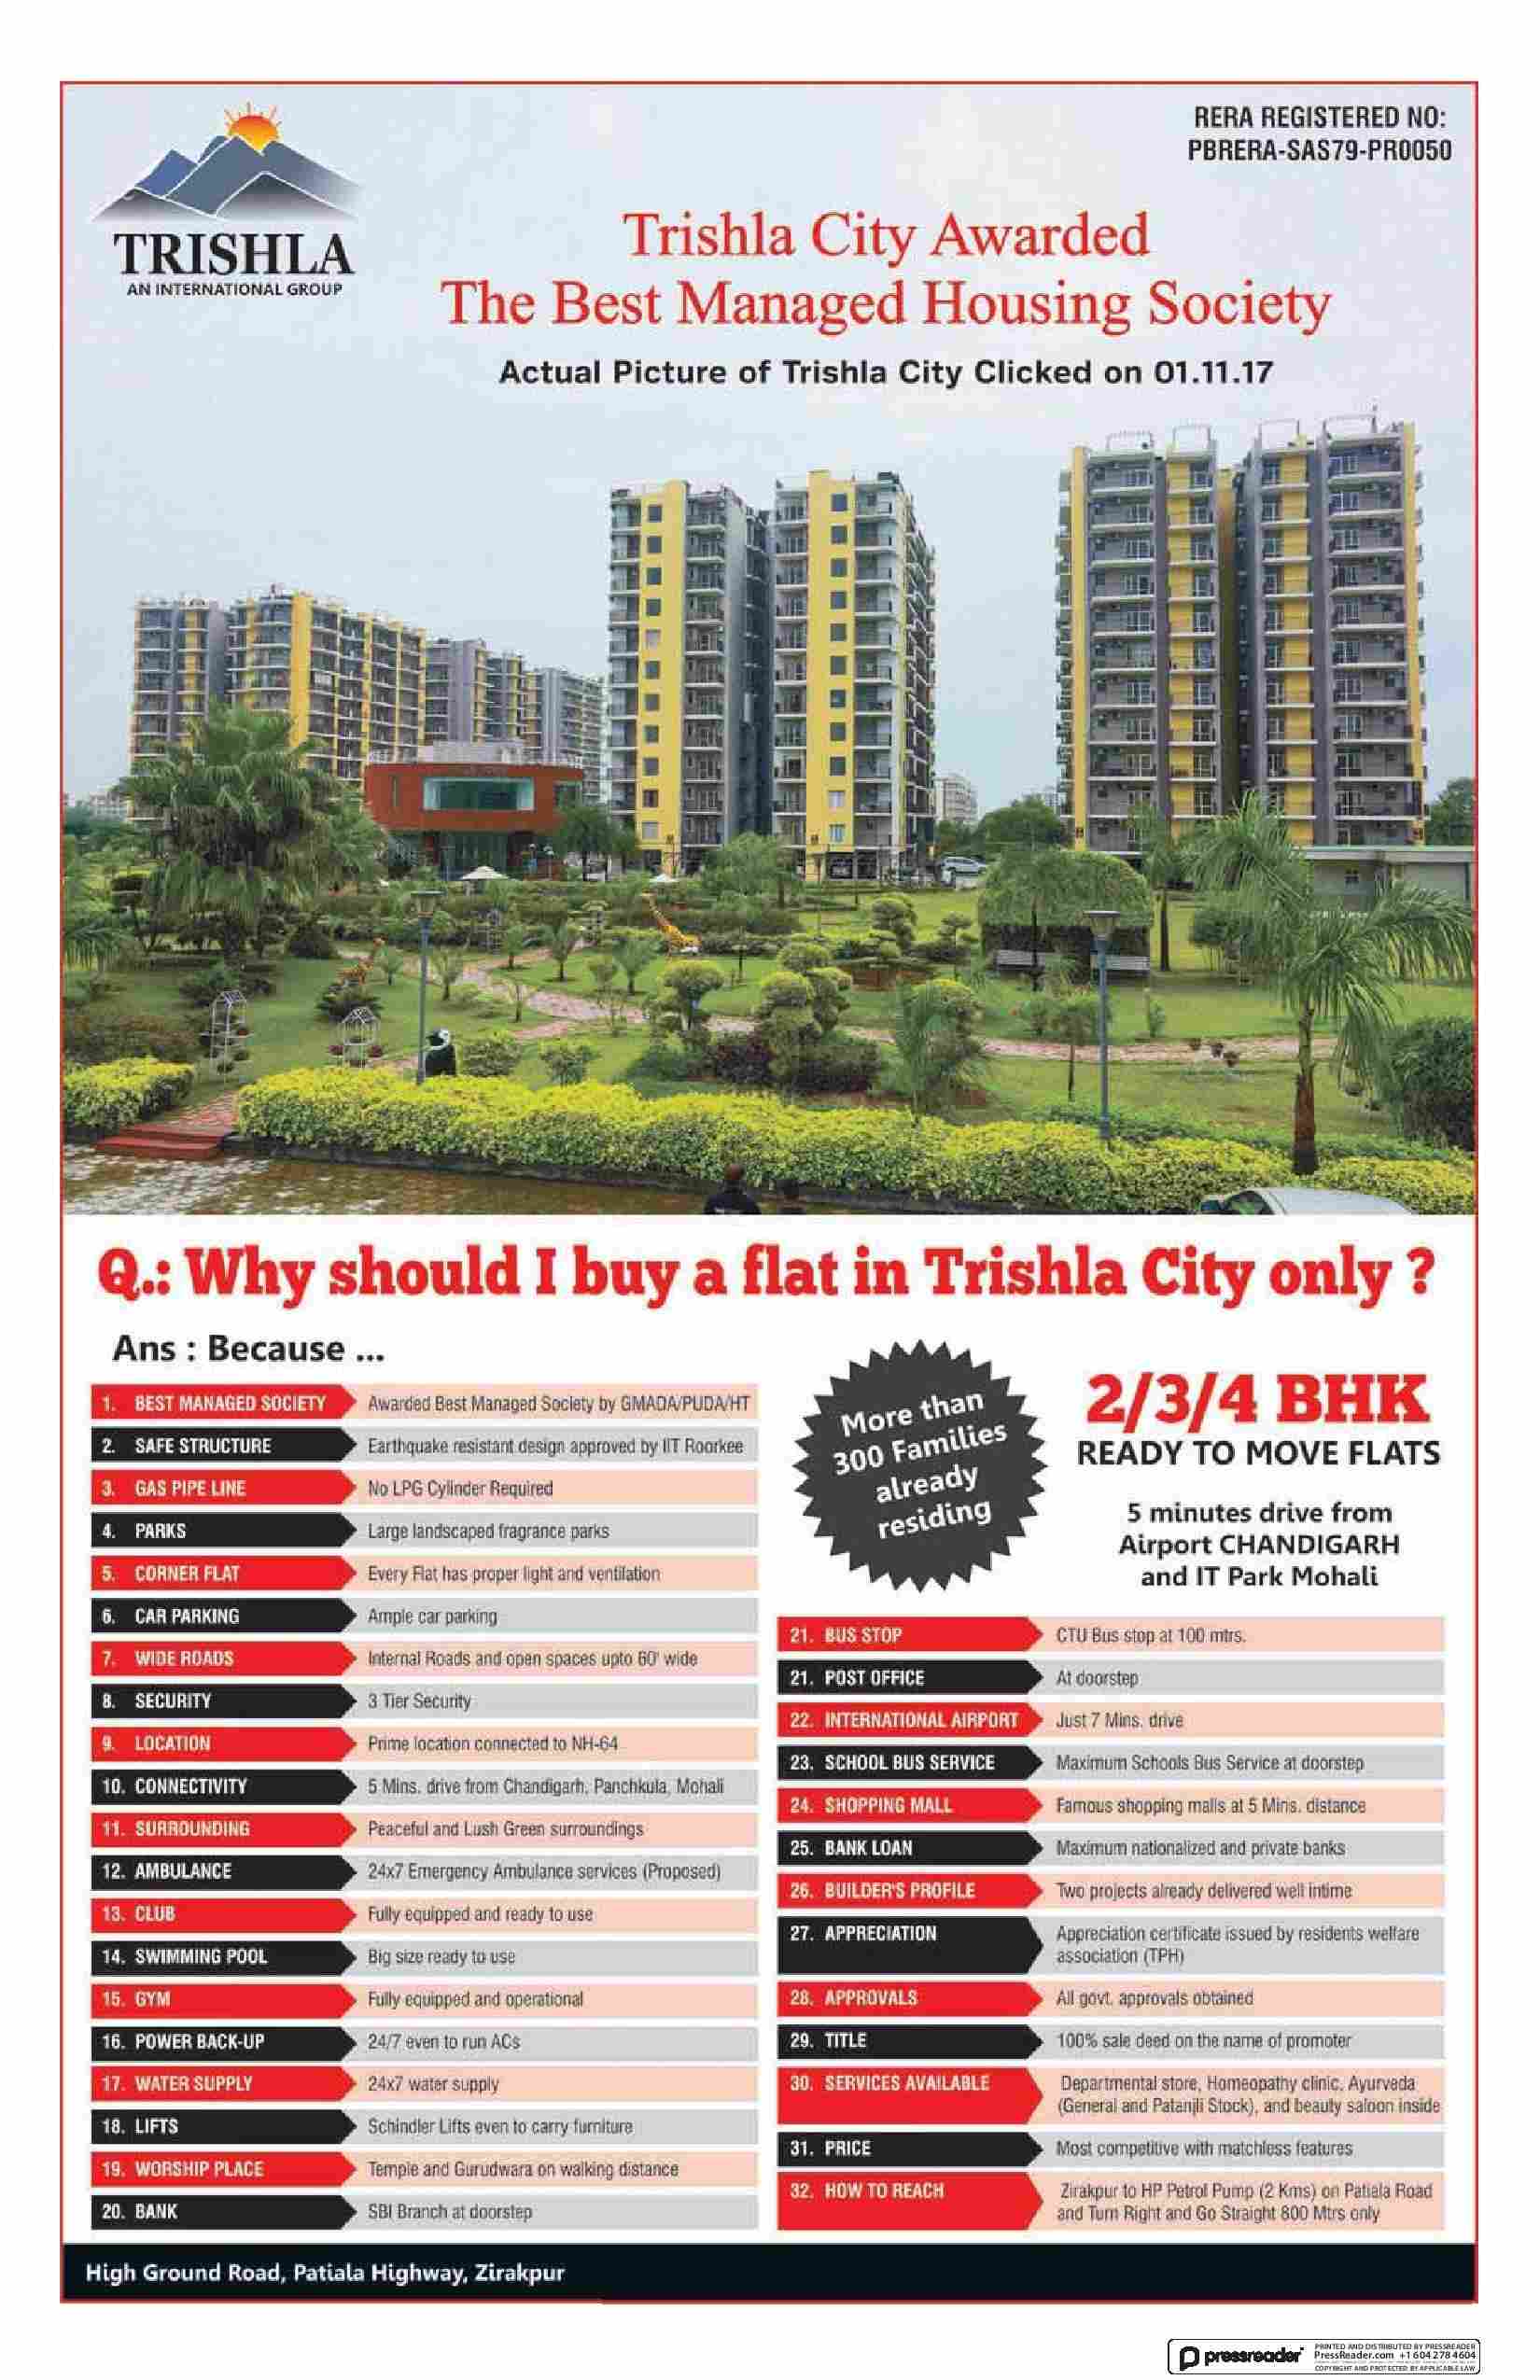 Book ready to move homes at Trishla City in Chandigarh